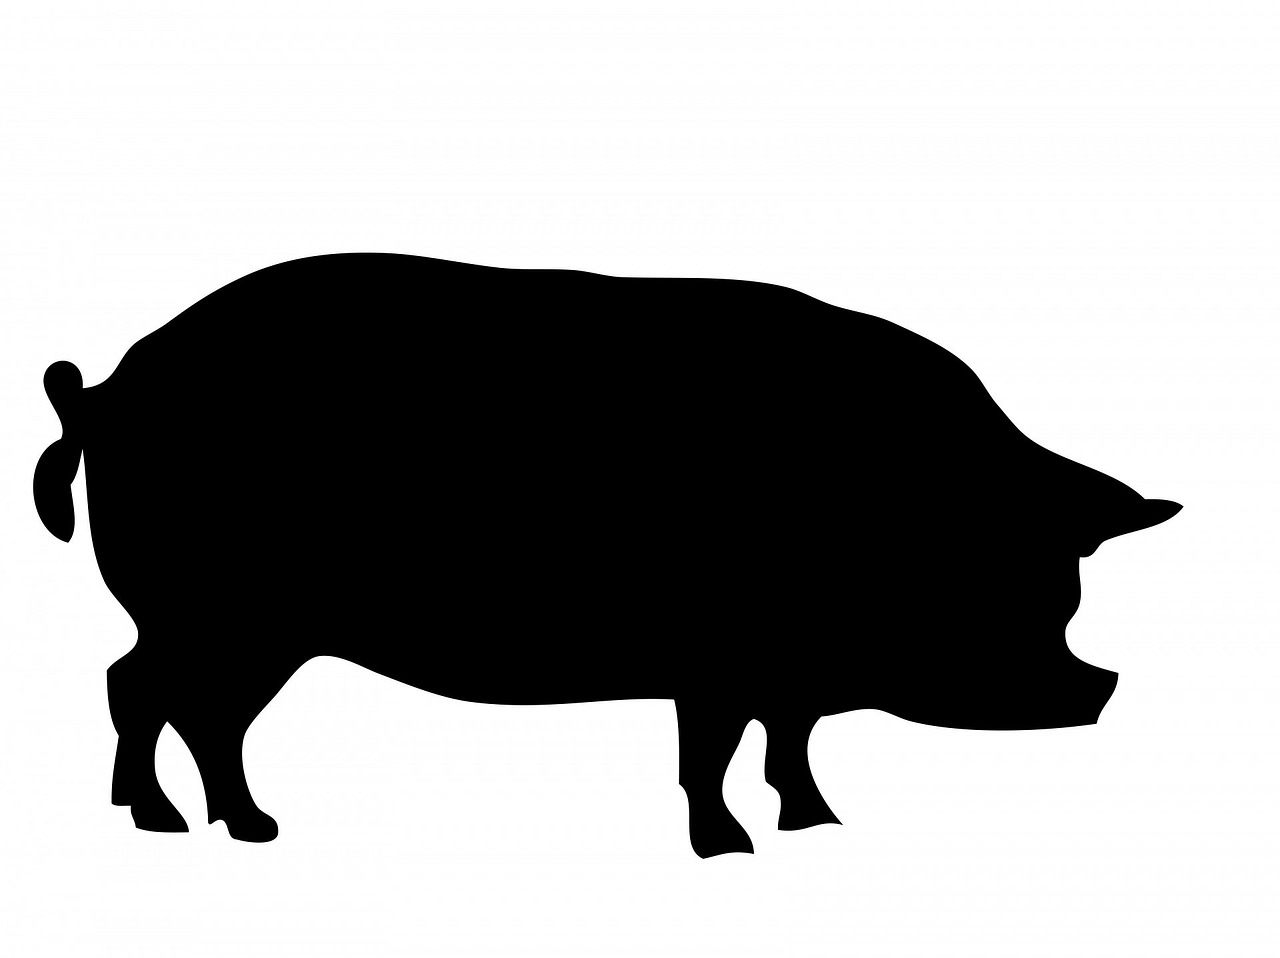 a silhouette of a pig on a white background, a picture, by Jan Zrzavý, pixabay, fine art, licking out, robotic pig, side view of a gaunt, dark. no text